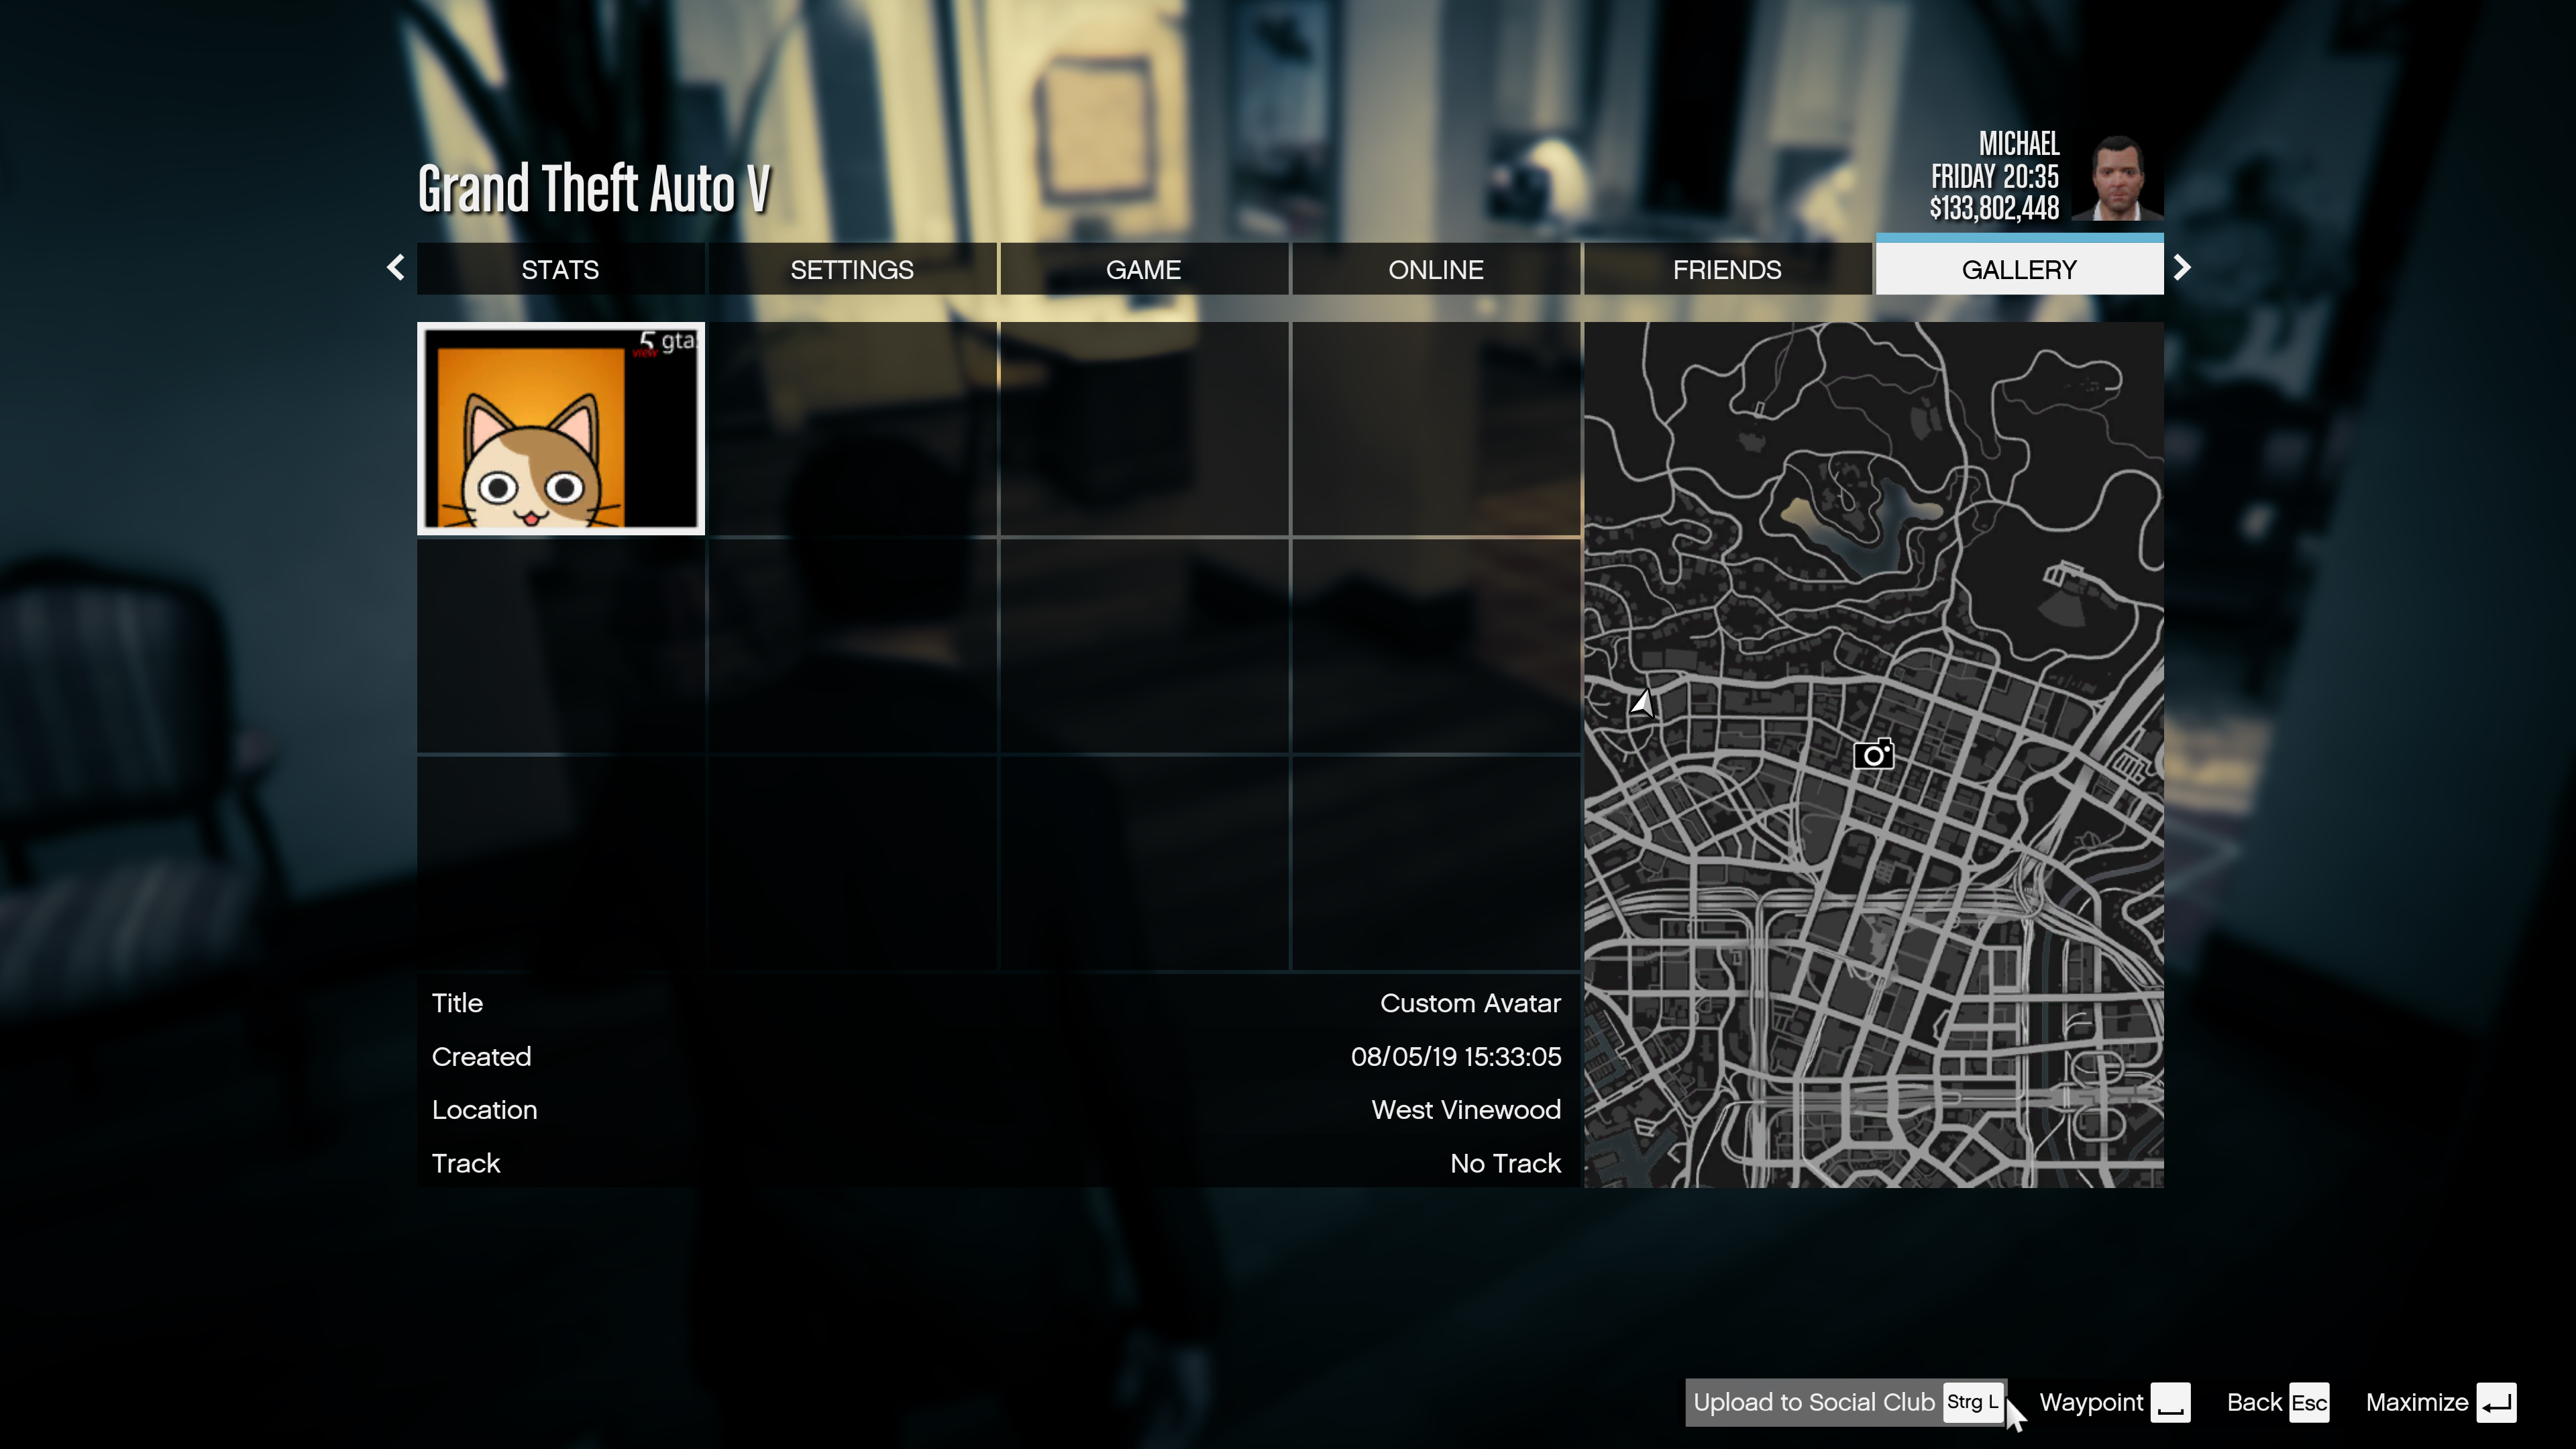 How to login to the Rockstar Social Club in GTA Online: A step-by